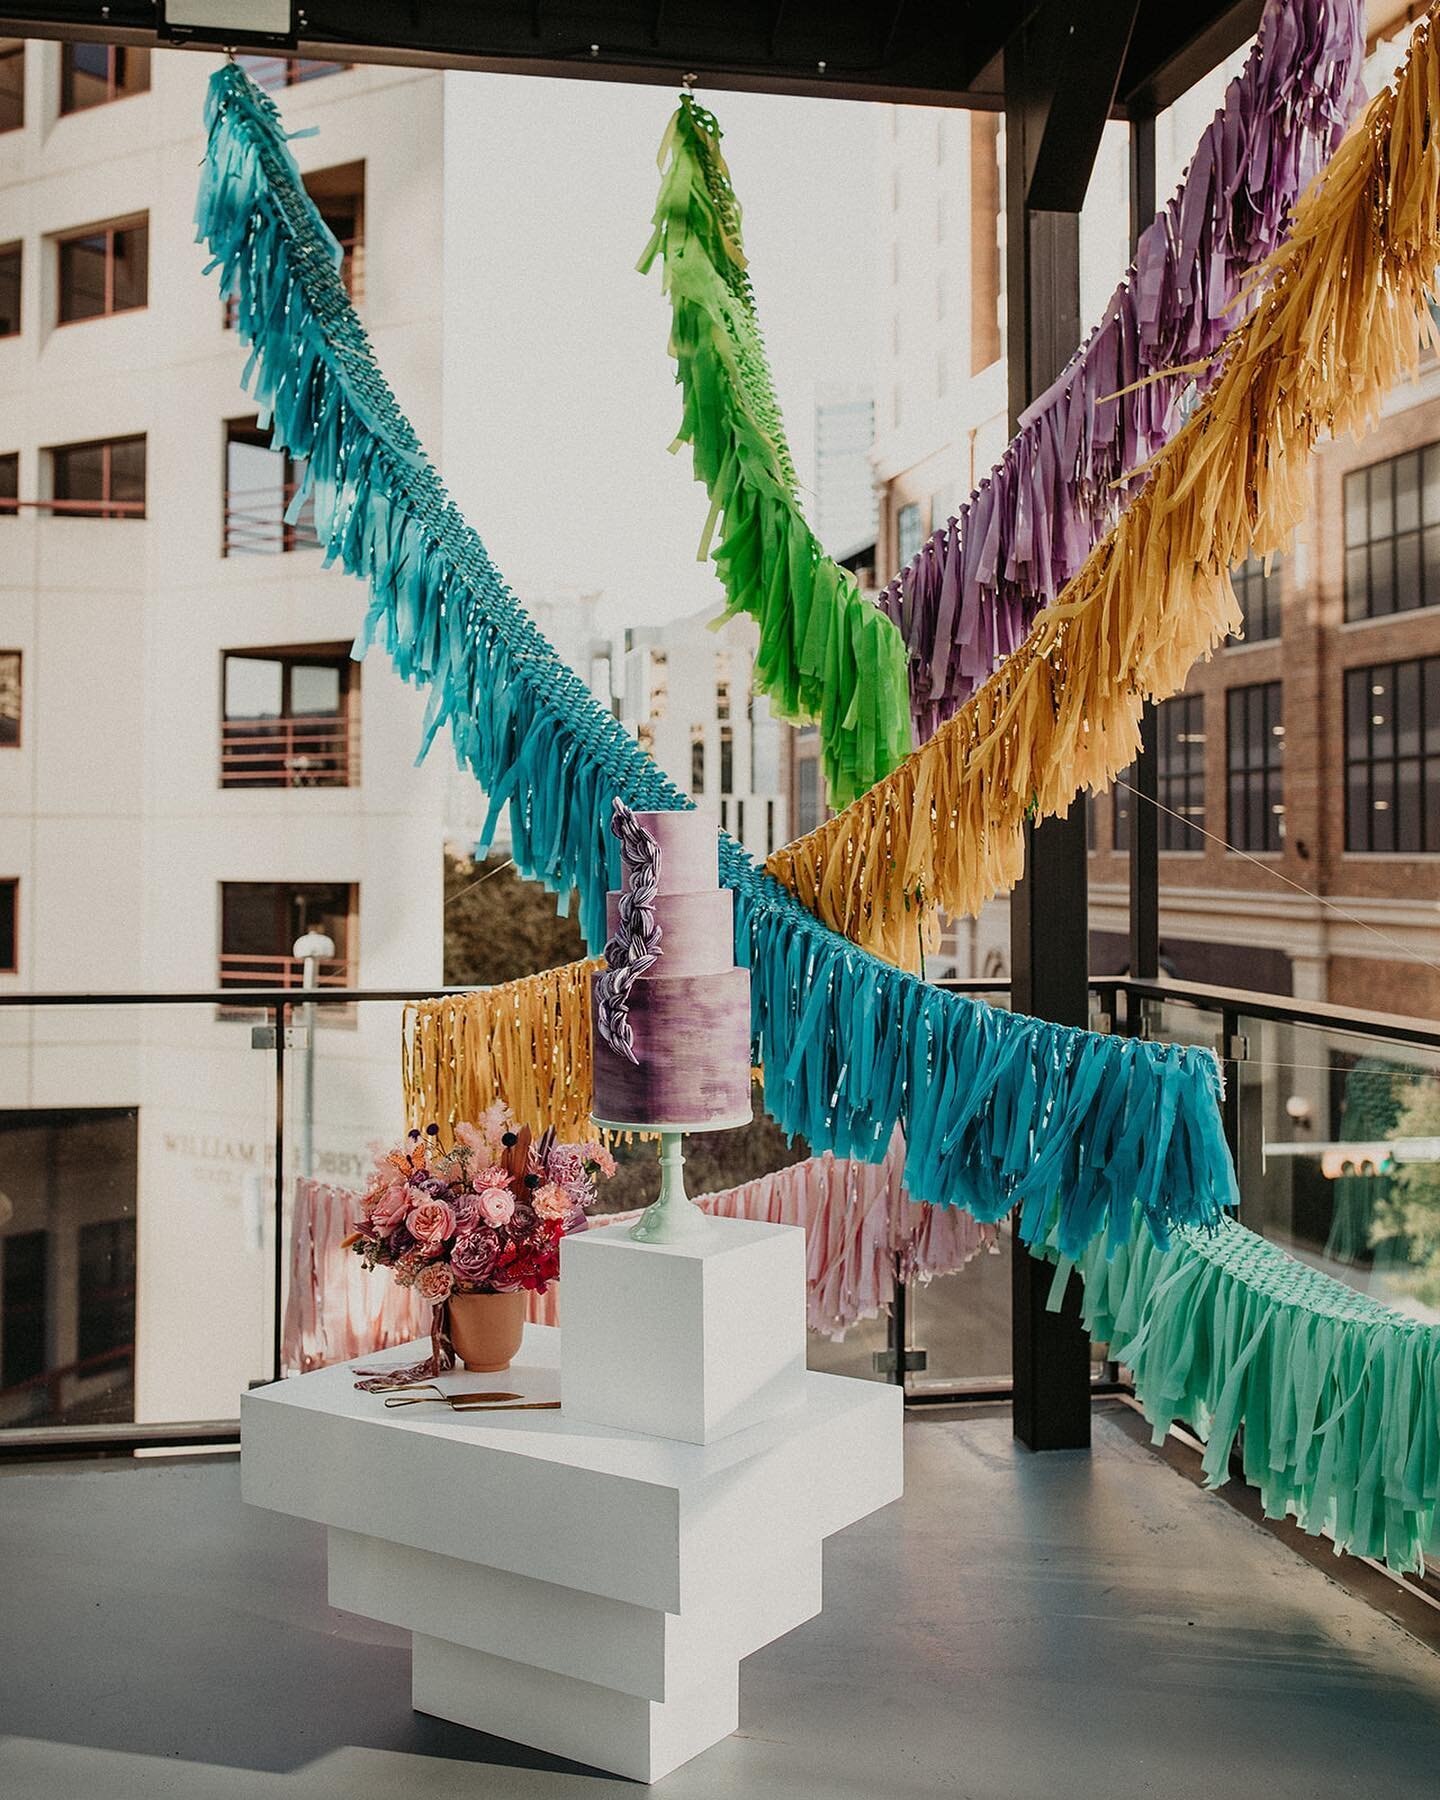 One of our favorite features on our Rooftop is all of the different angles, lines, and textures of the buildings that surround us. 🏙 And then throw in the bright colors + energy of this magical set up? Um...Still swooning! 😍
&bull;
&bull;
&bull;
#w